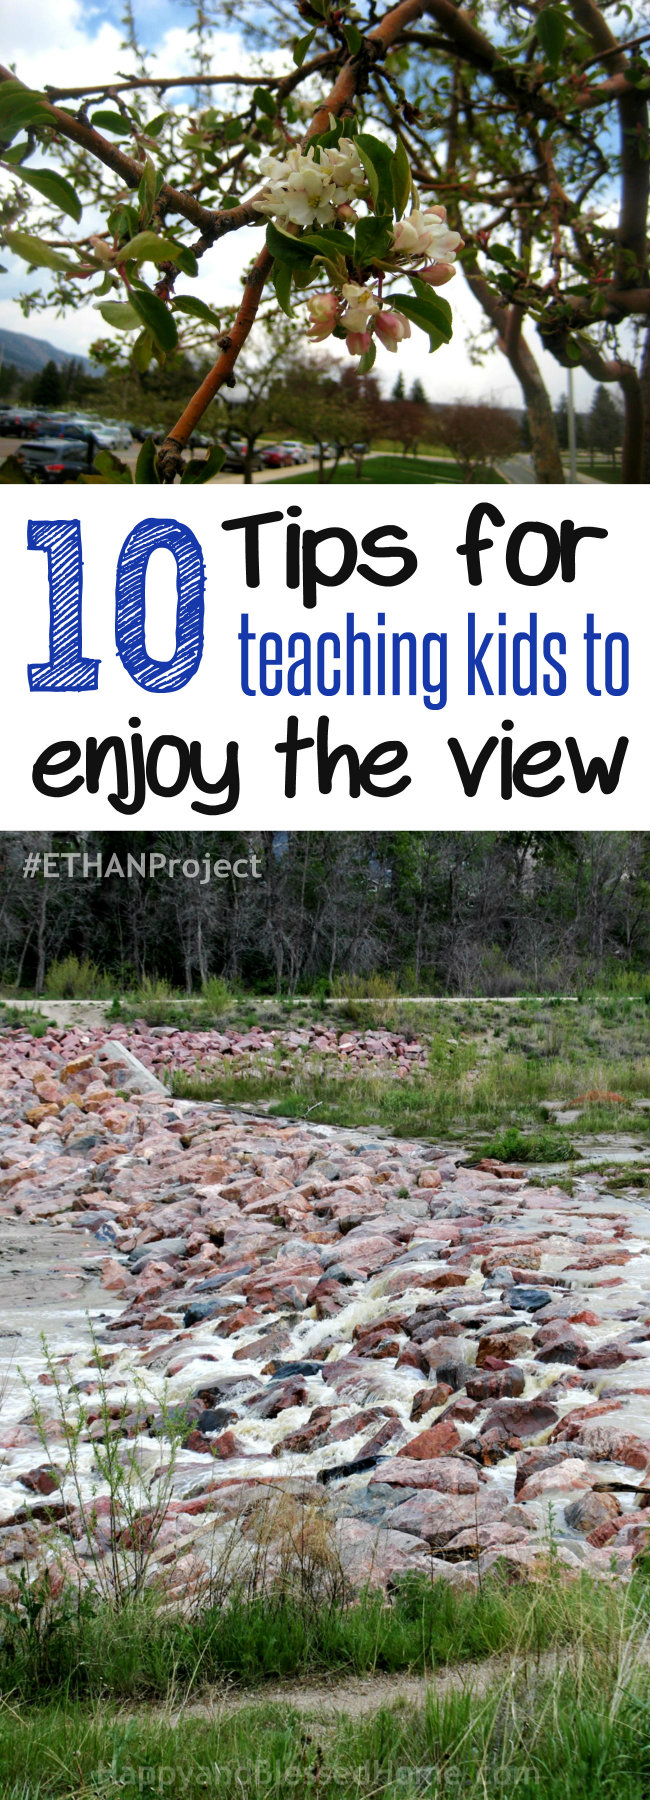 10 Tips for teaching kids to enjoy the view #ETHAN Project with original photos by HappyandBlessedHome